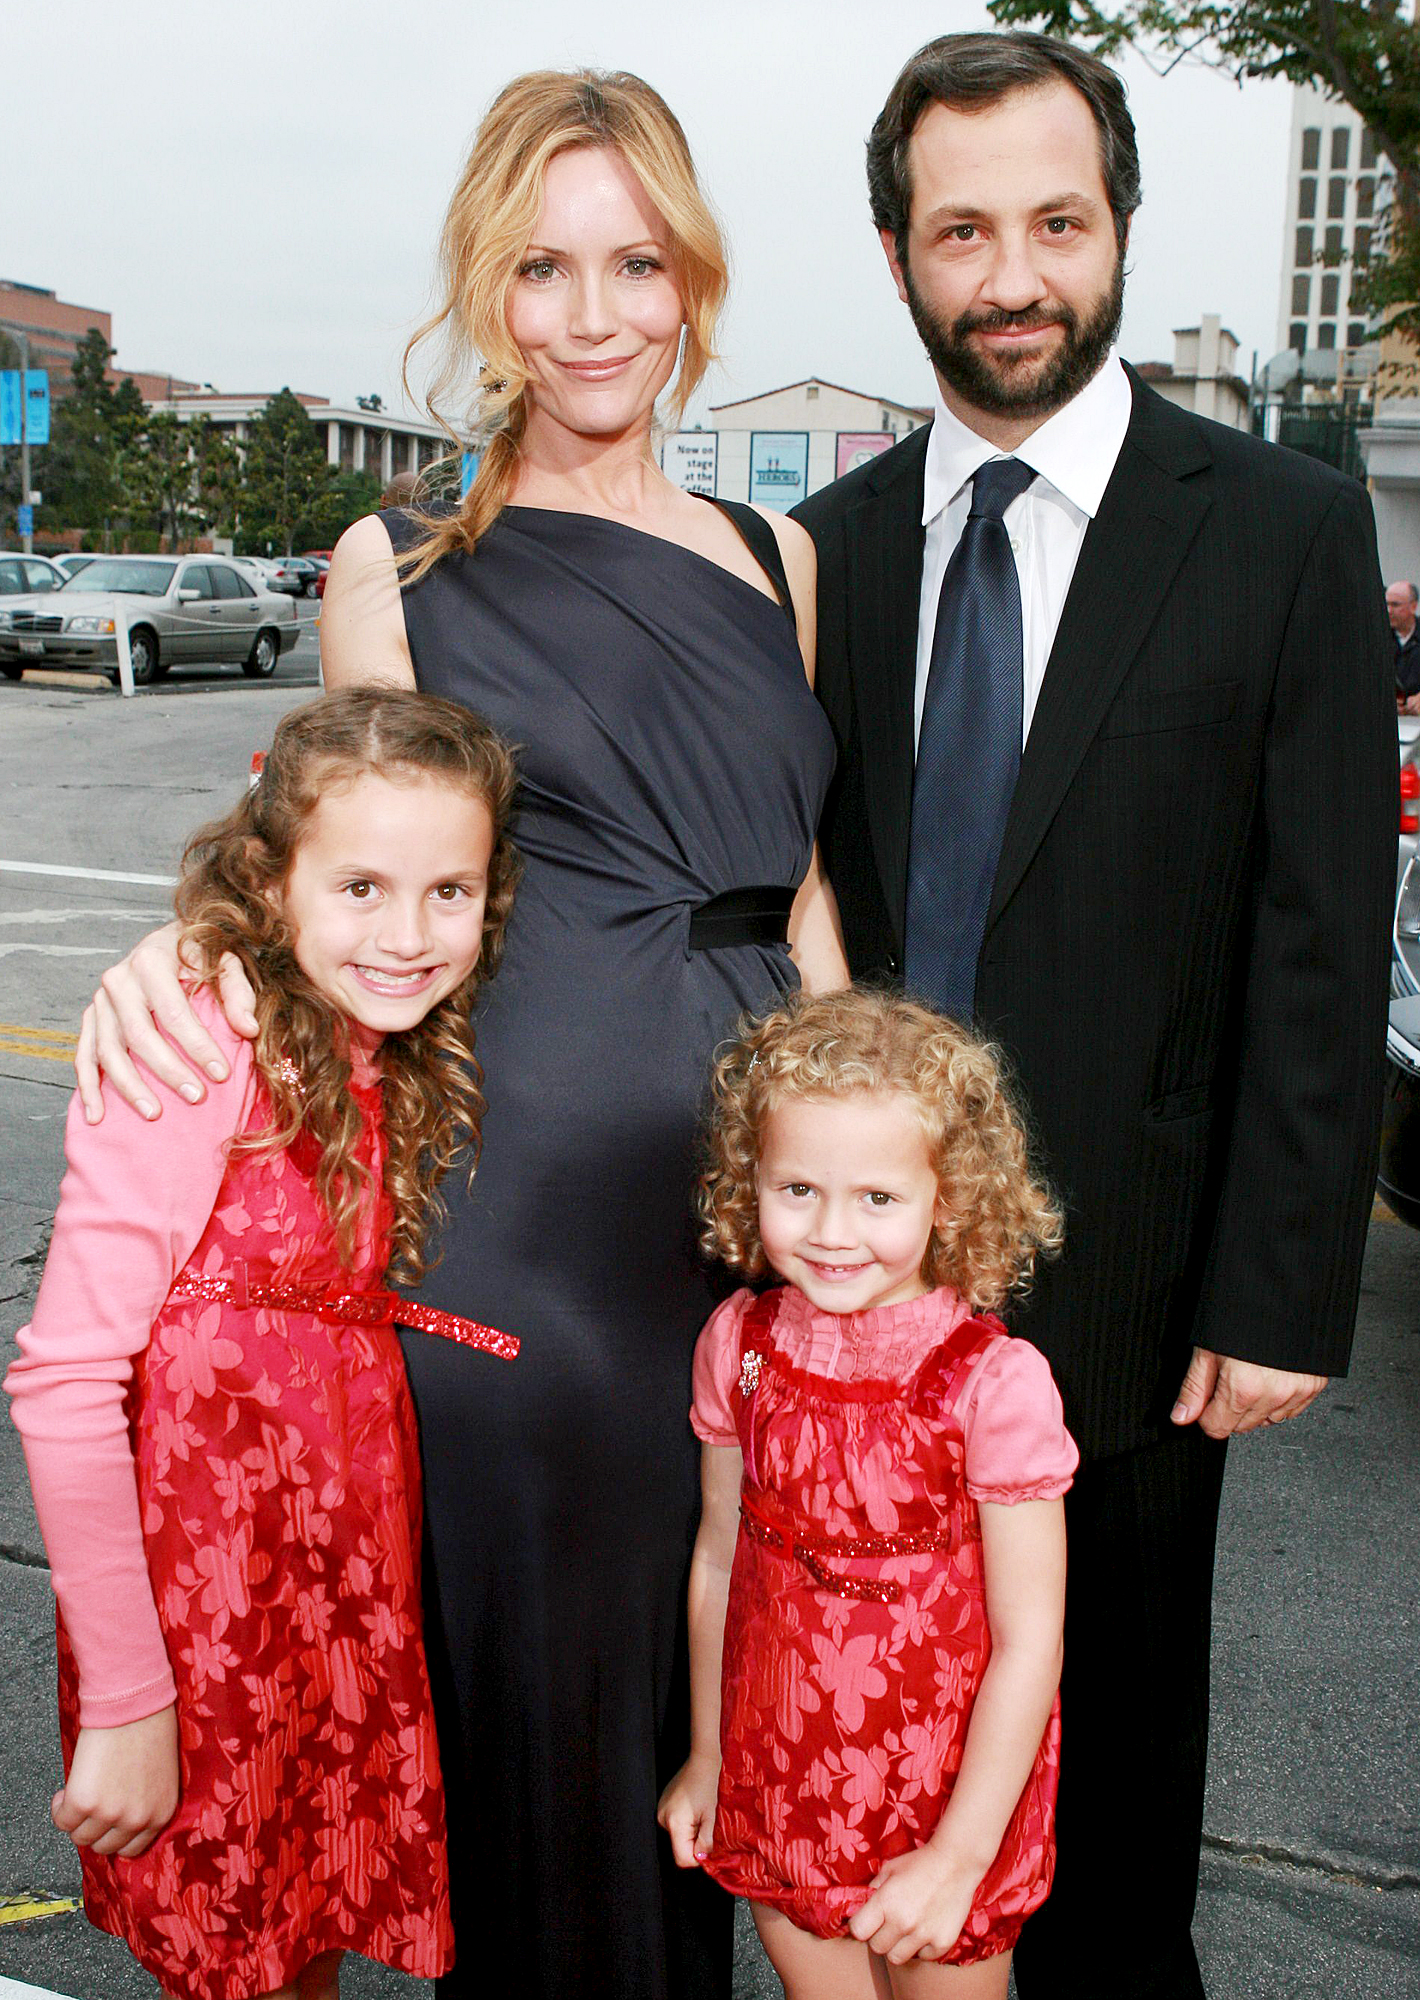 October 2002 Leslie Mann and Judd Apatow Relationship Timeline